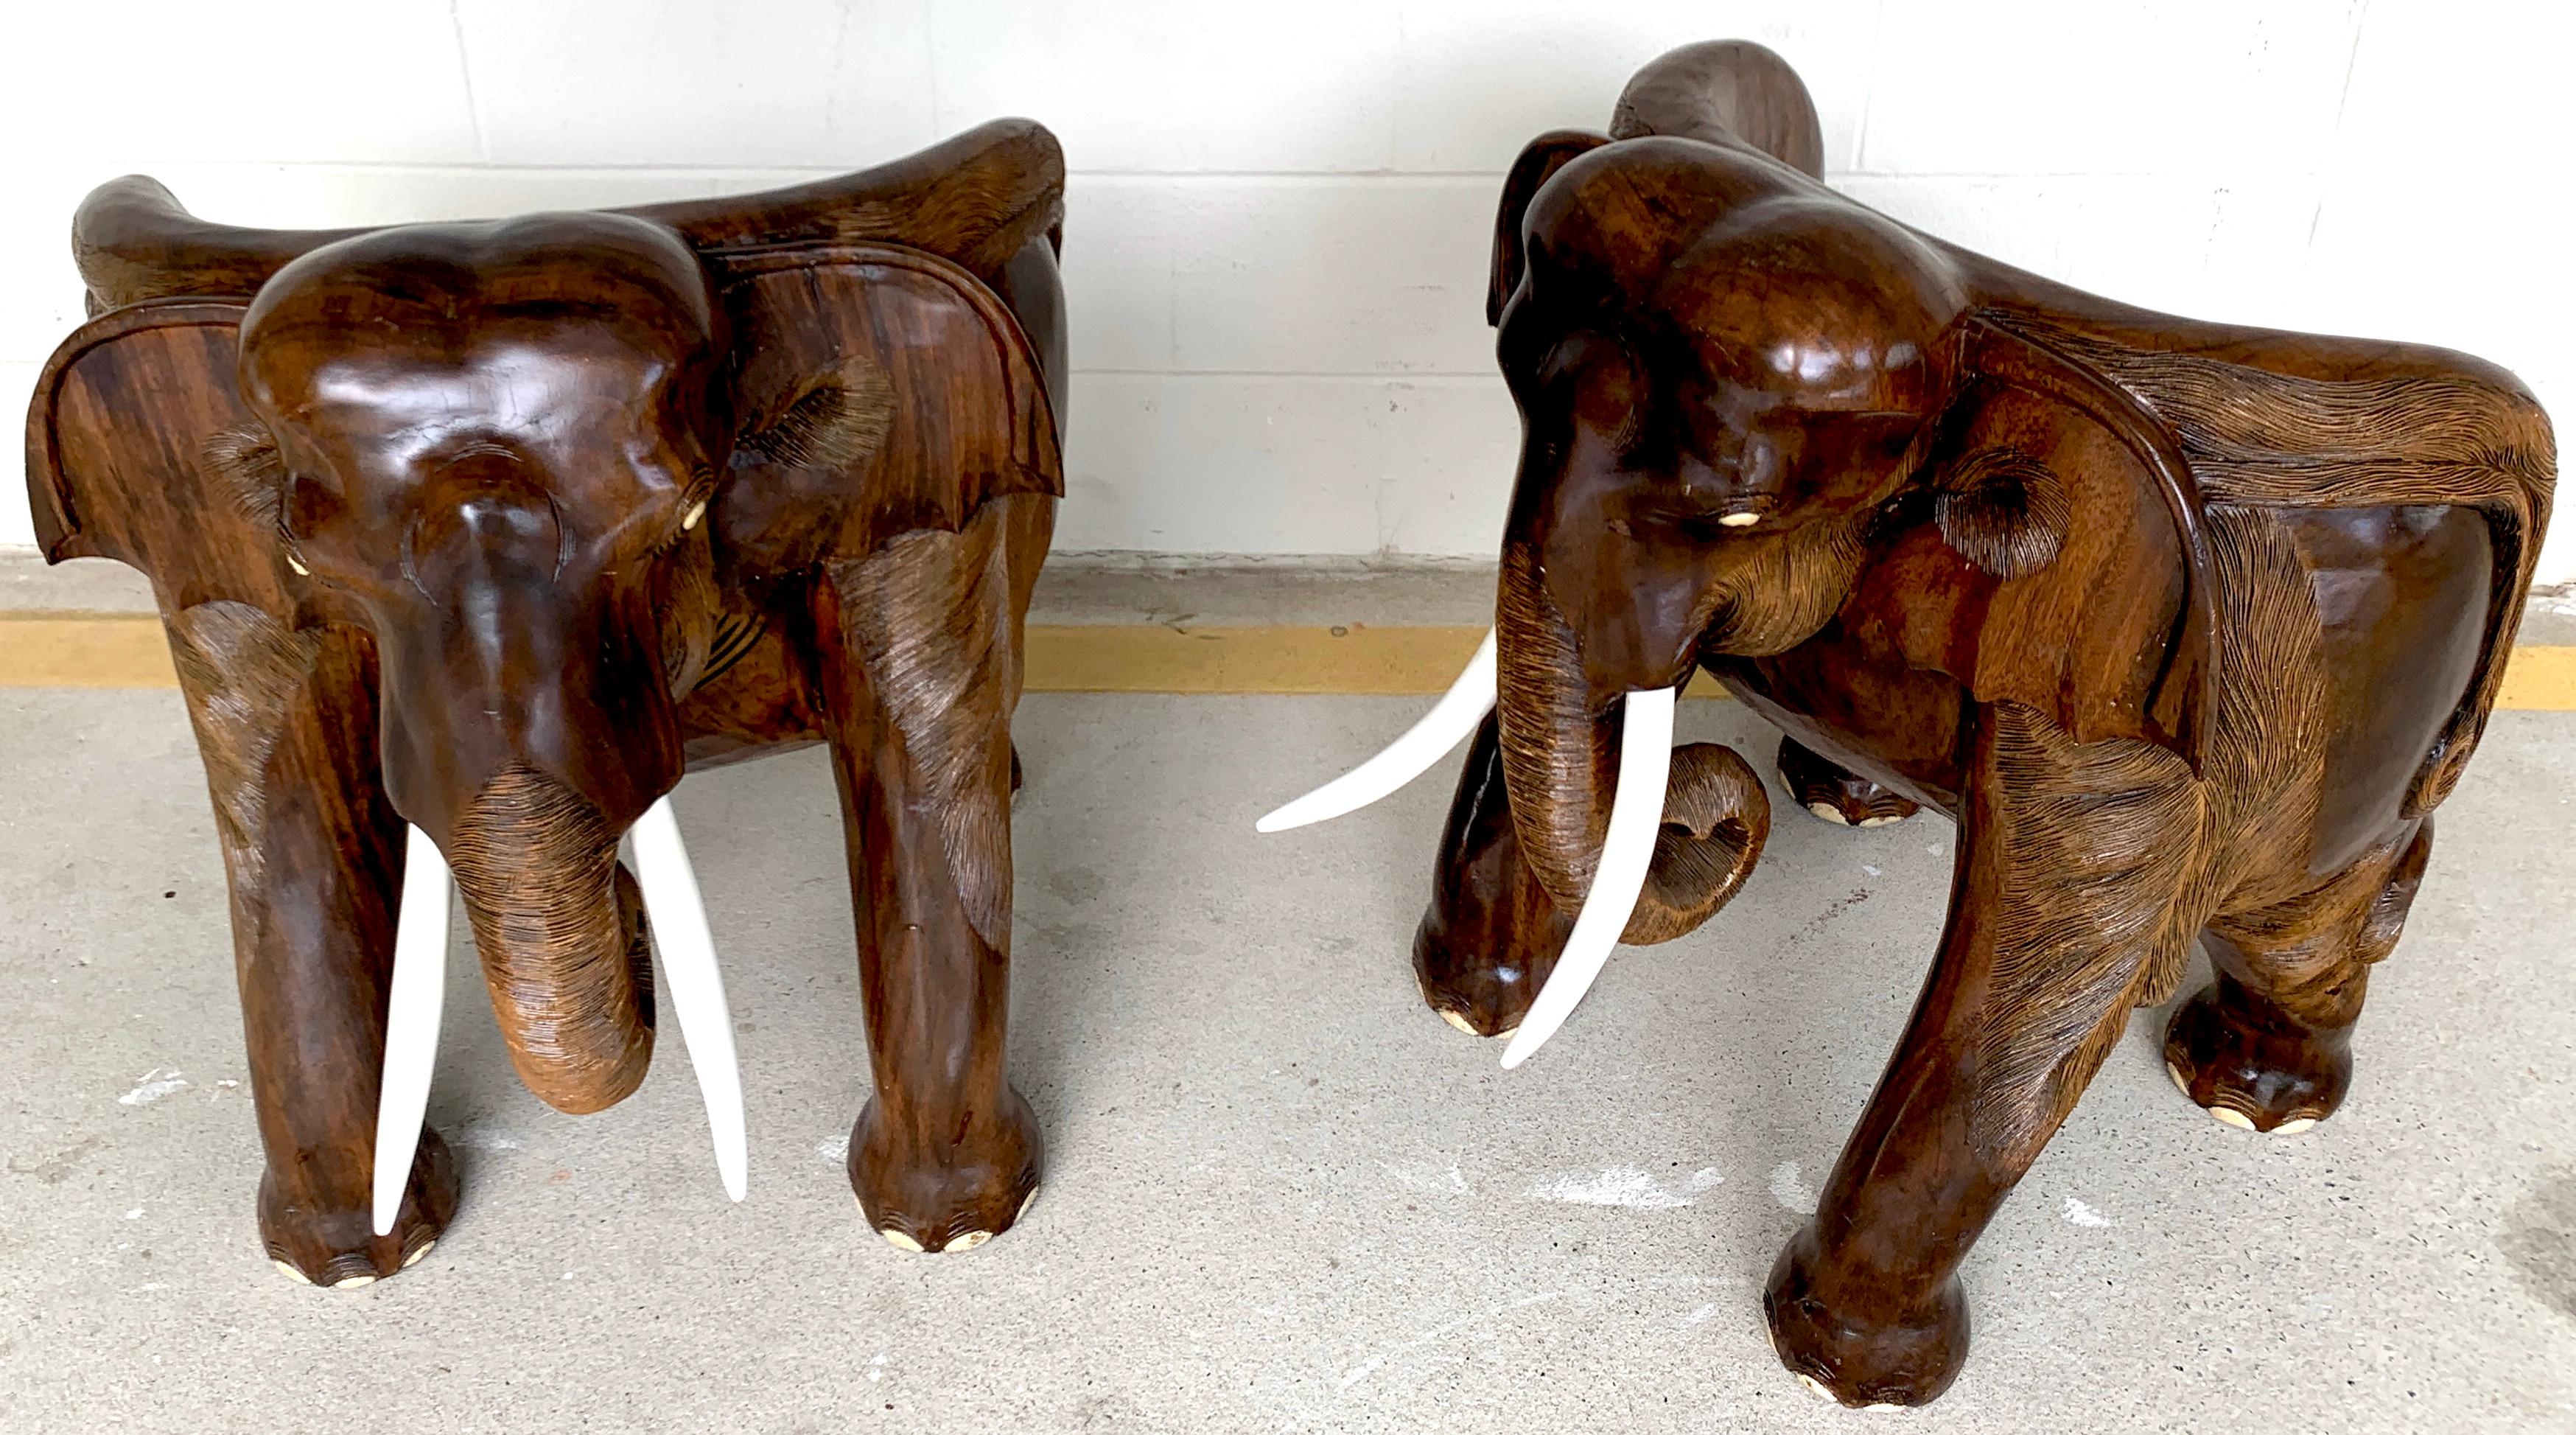 Pair of magnificent of late 19th century hardwood carved elephant chairs
Each one a comfortable, substantial realistically carved, chair, modelled as a standing elephant. The raised back and sides carved as the head and ears, with carved painted